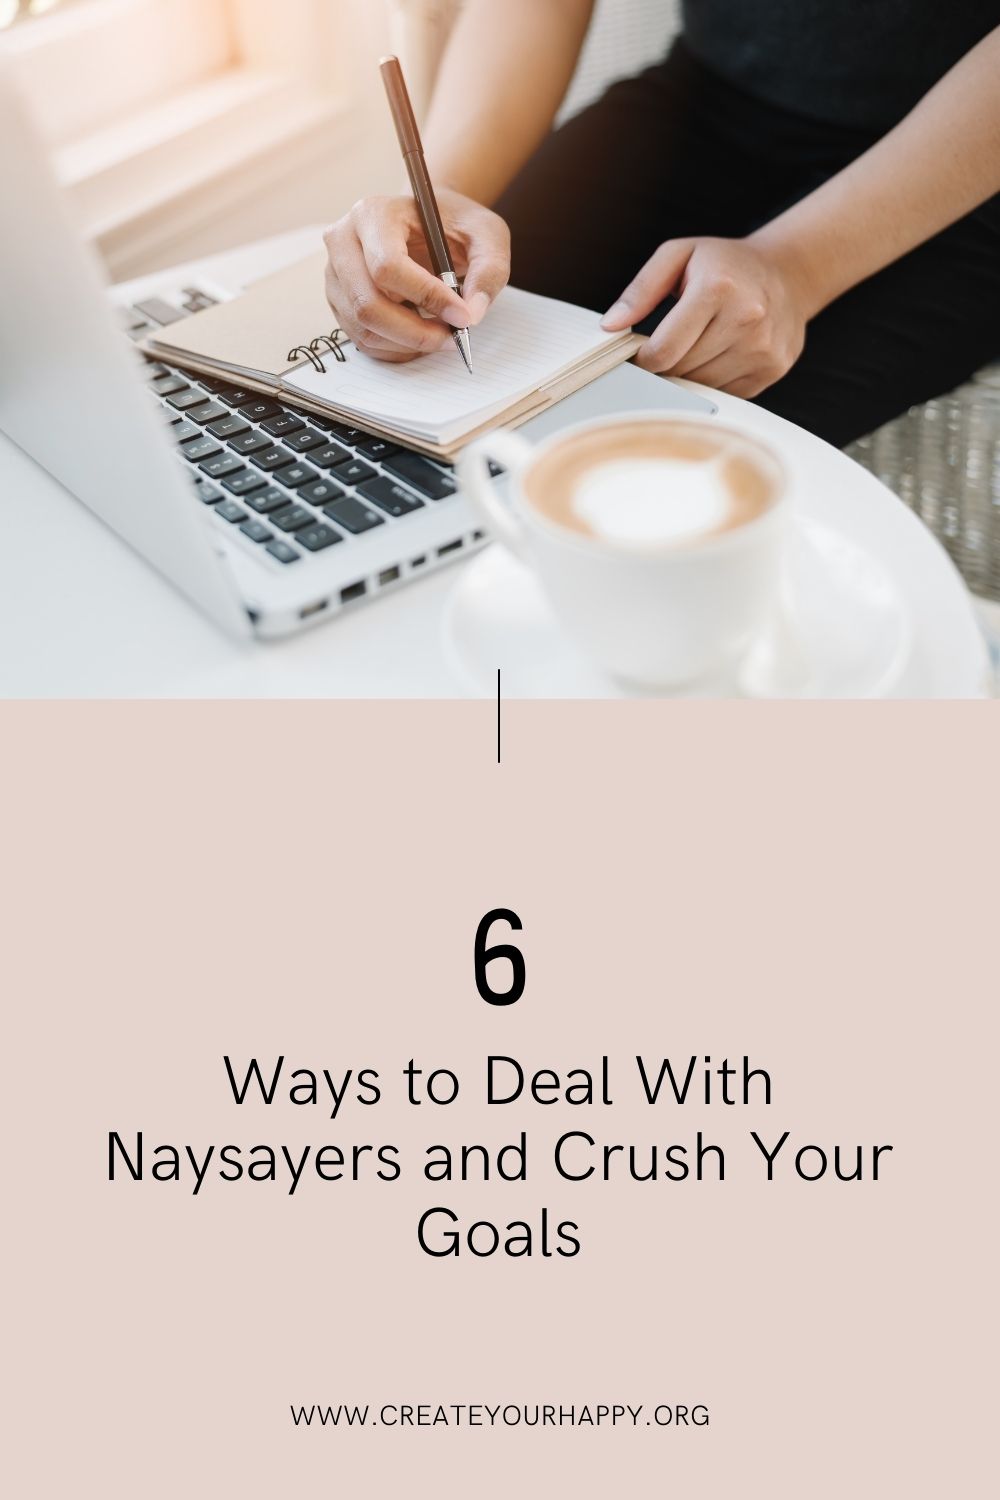 6 Ways to Deal with Naysayers and Crush Your Goals